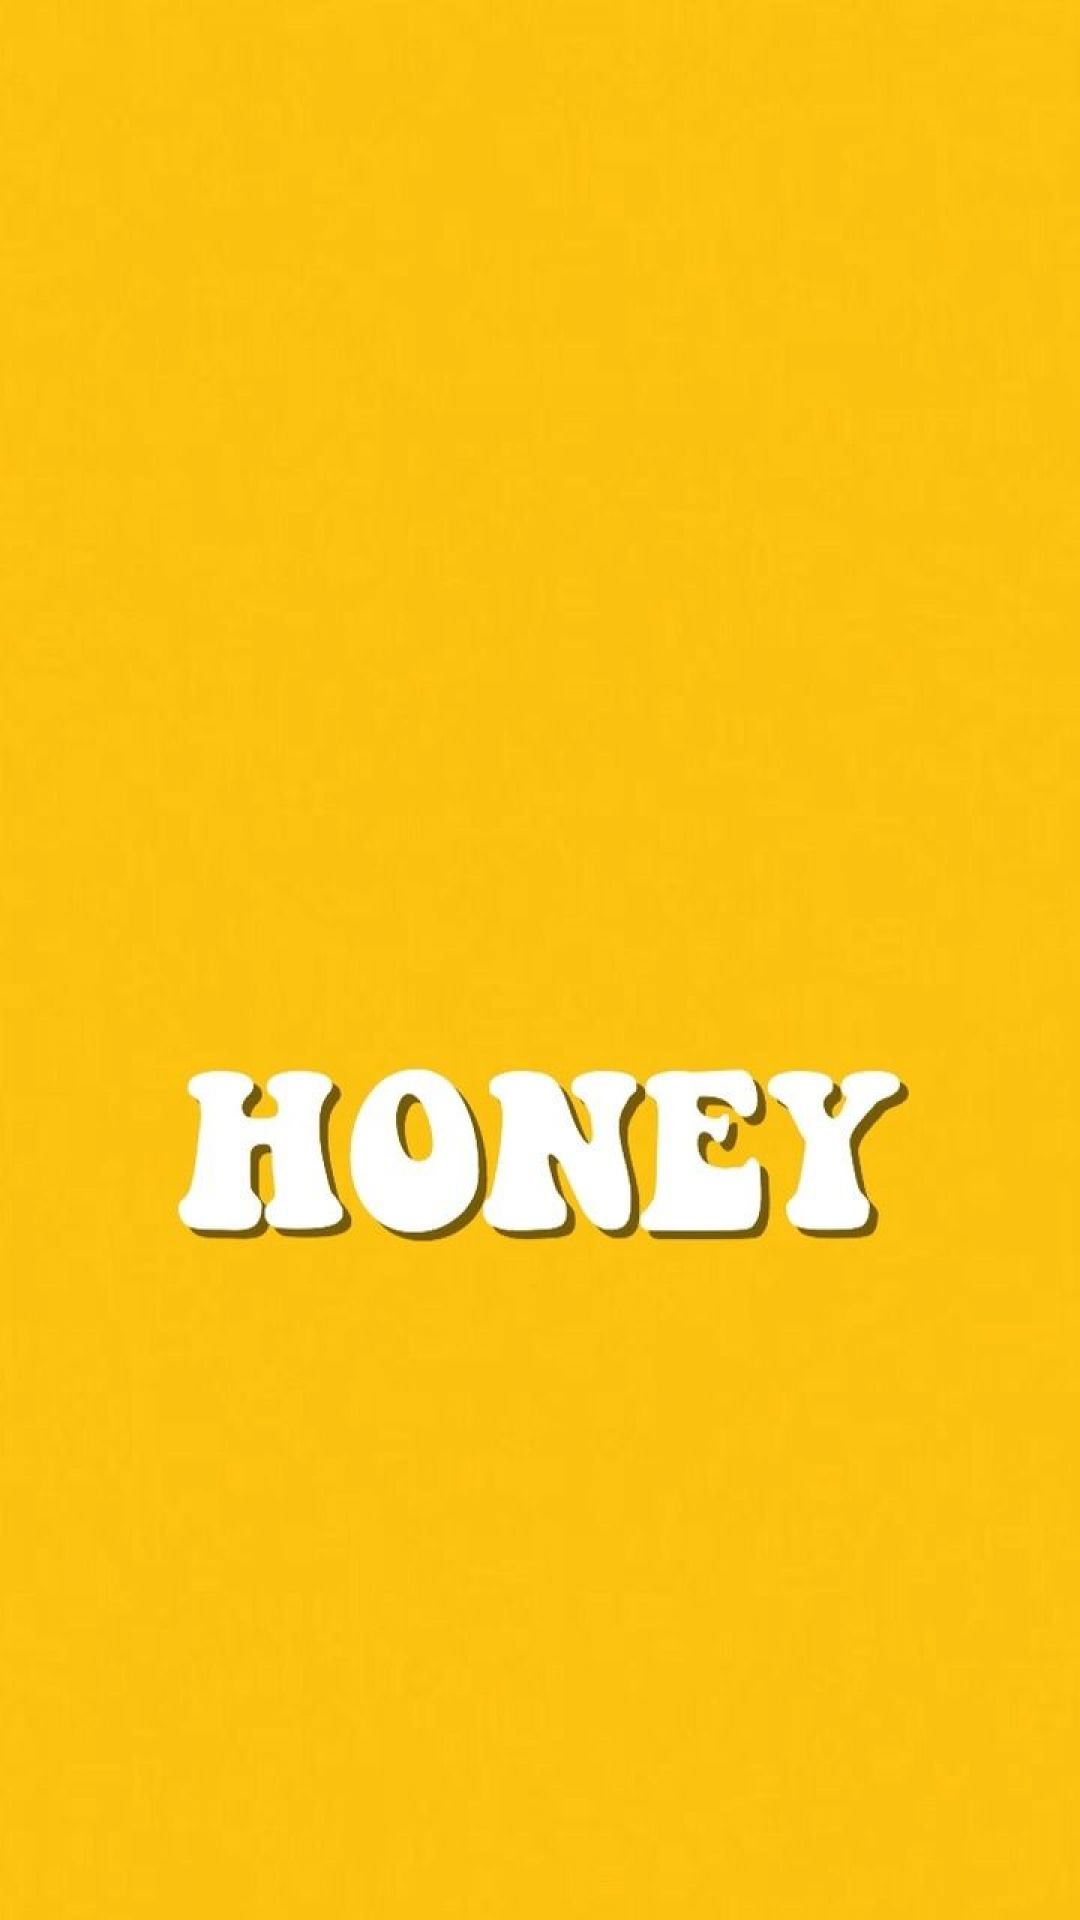 A yellow background with the word honey written in white - Honey